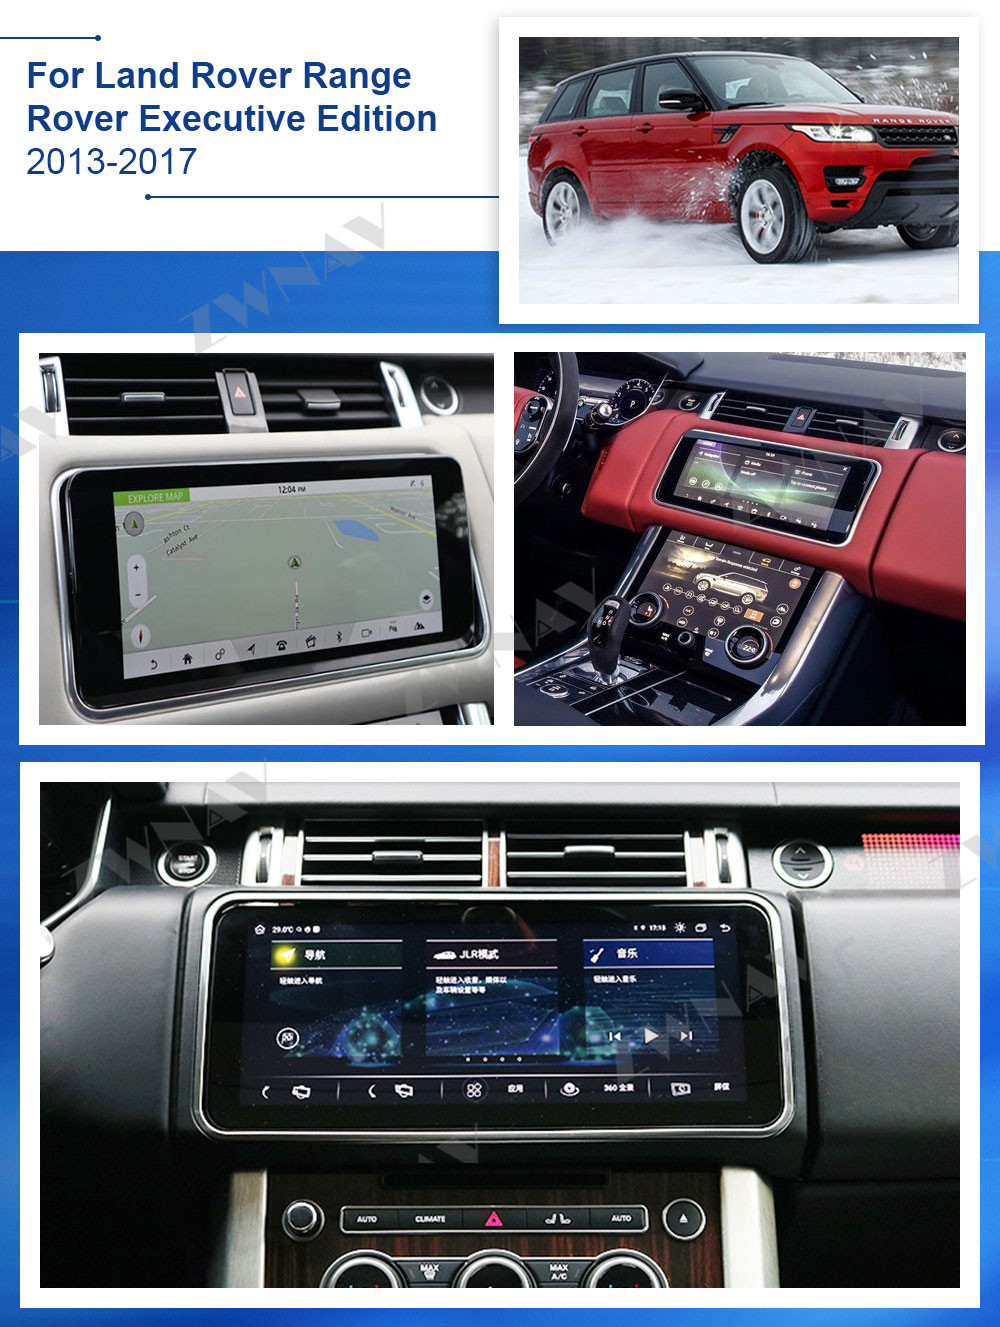 Android GPS Navi For Land Rover Range Rover Executive Edition 2013 2014 2015 2016 2017 Radio Video Stereo Multimedia Player Unit